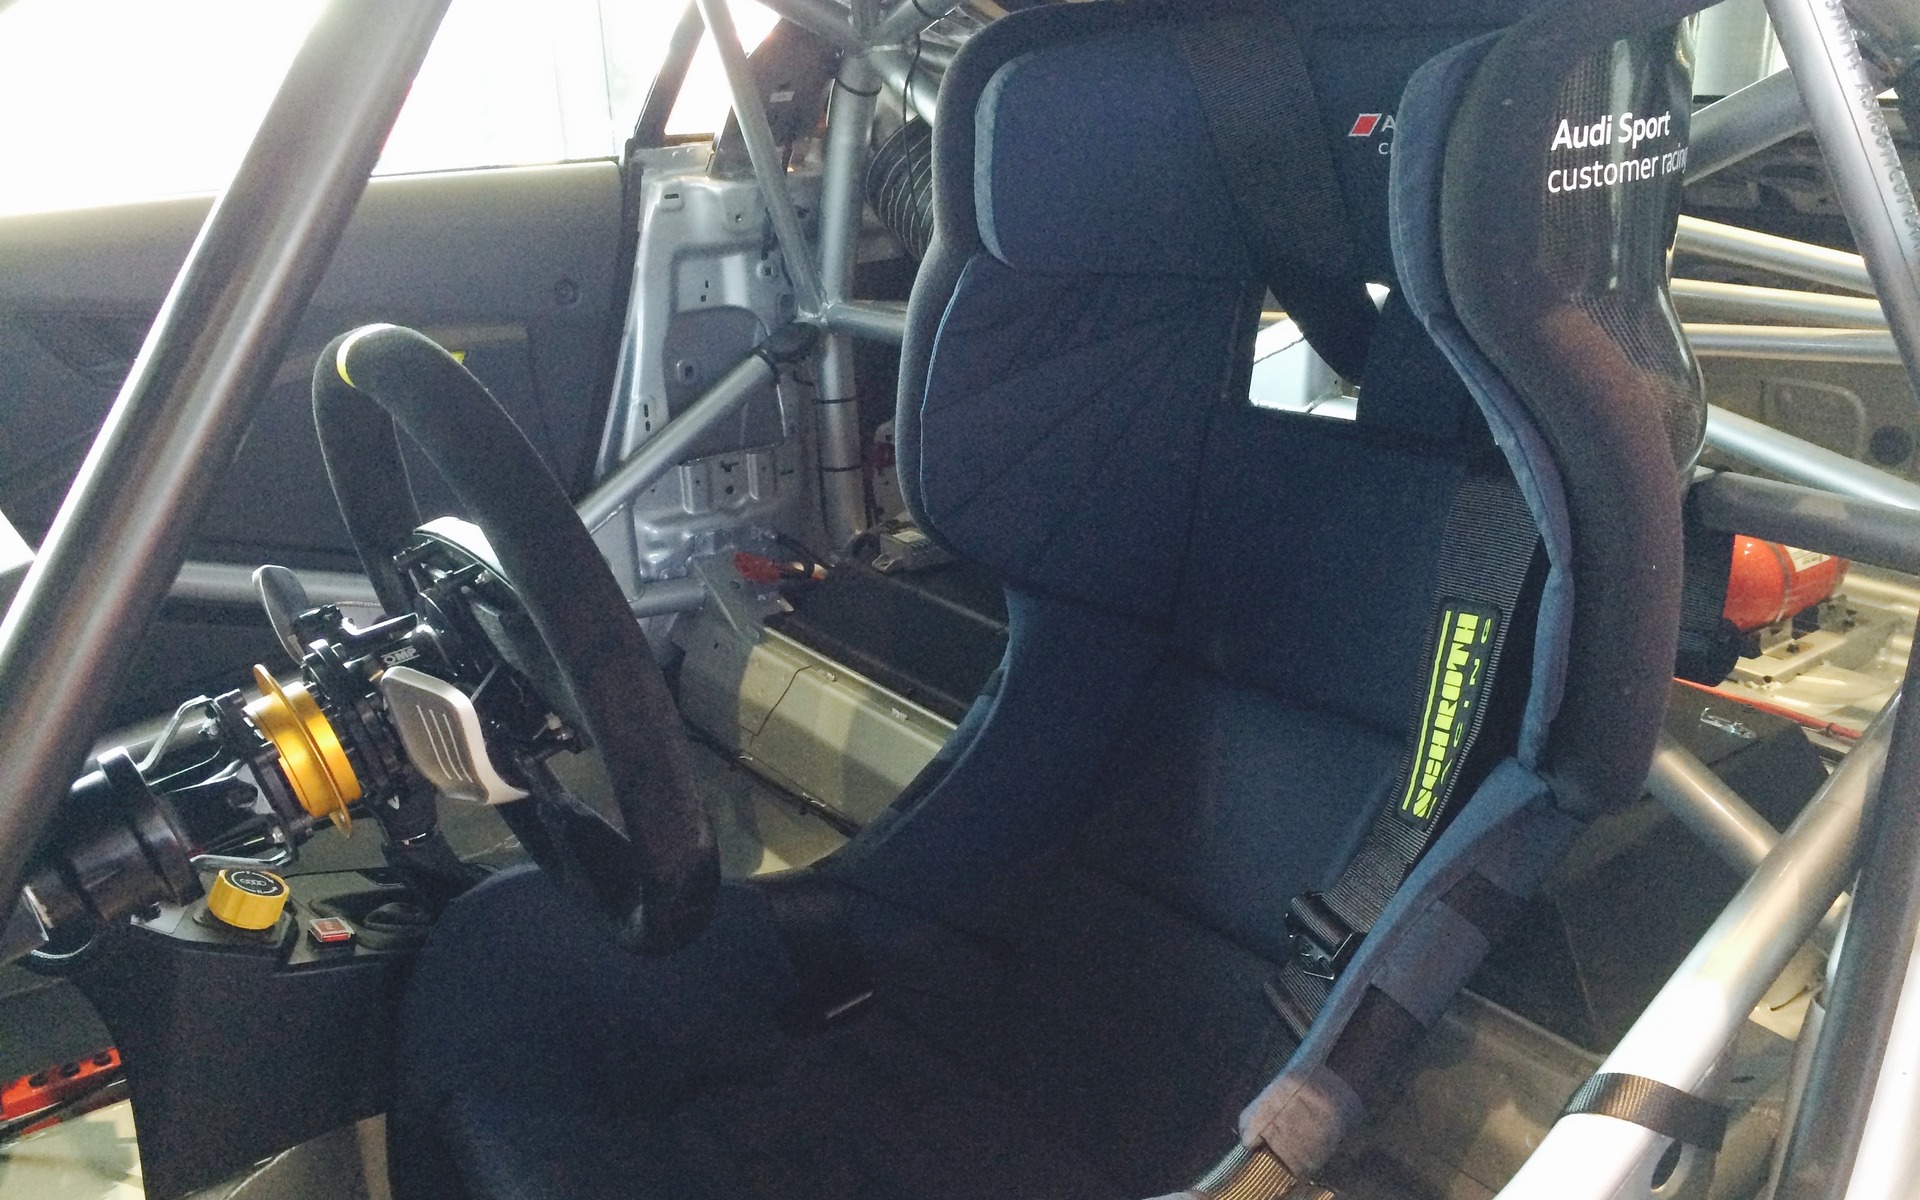 Competition seat borrowed from the Audi R8 LMS race car.